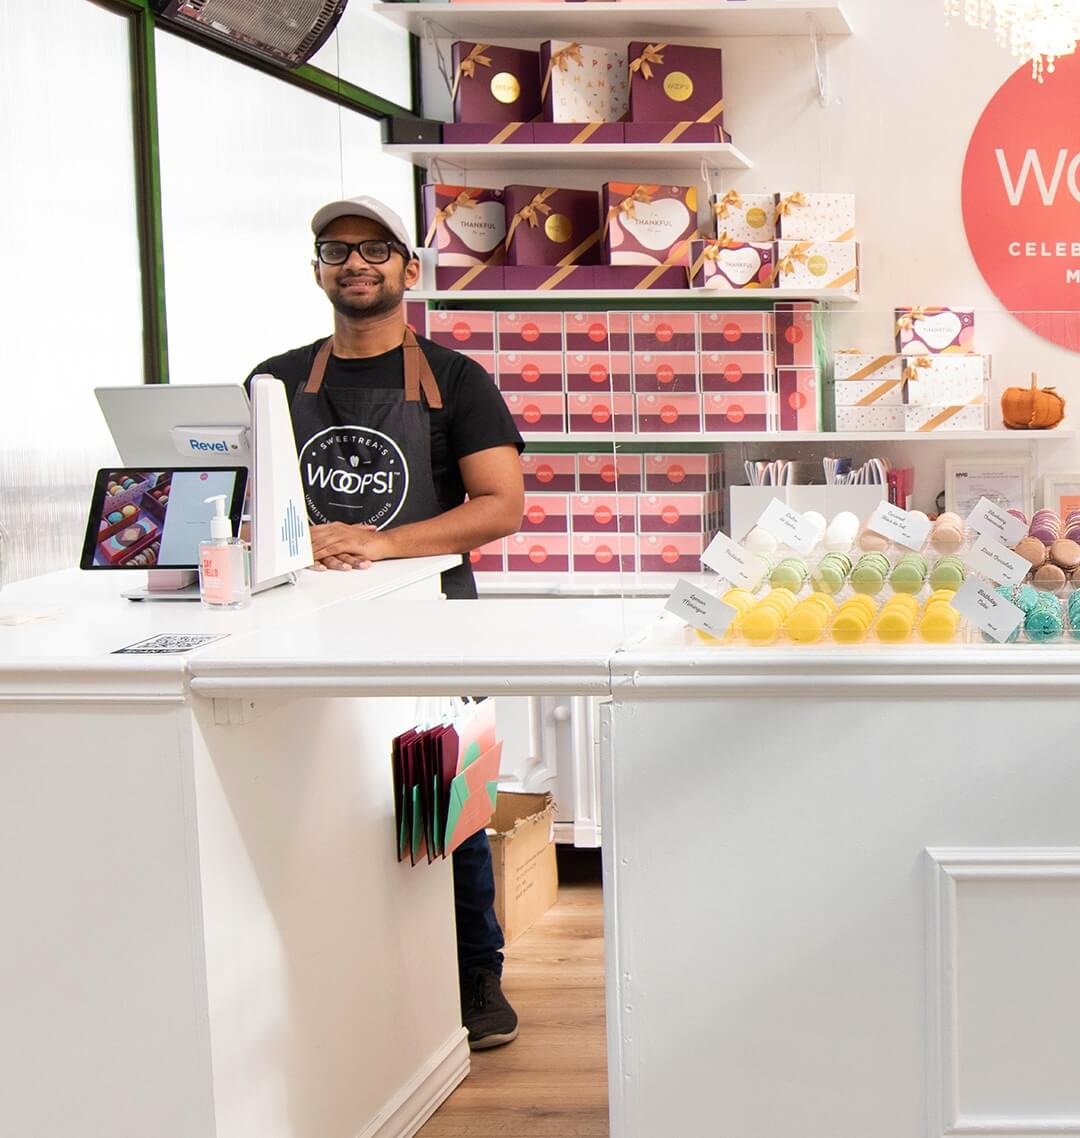 Woops! Booth at Bryant Park filled with colorful macarons and a smiling man behind the counter